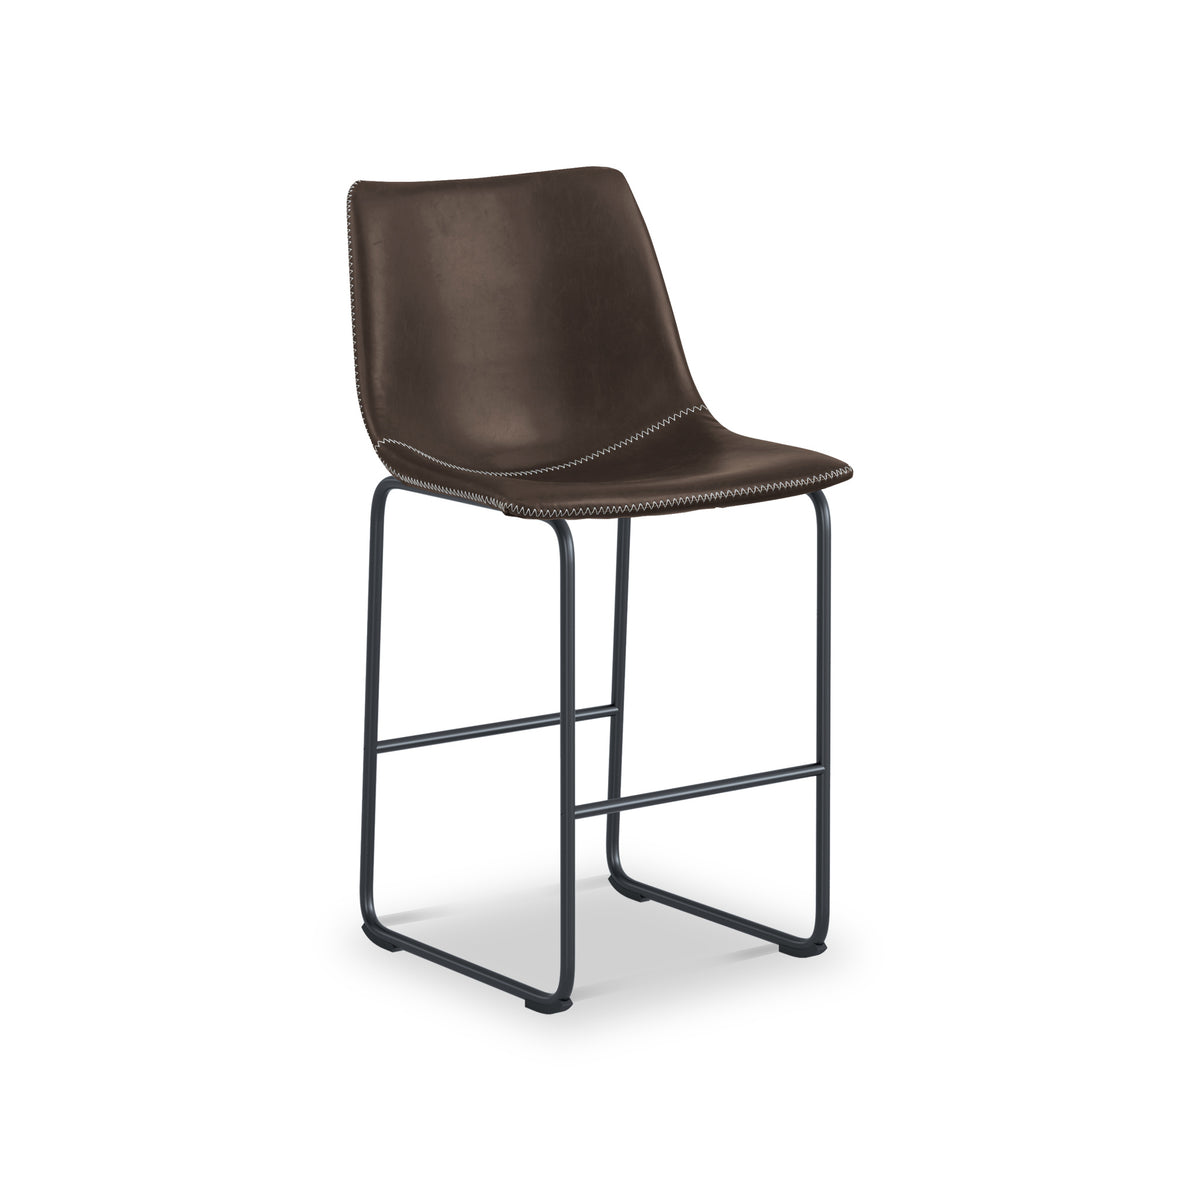 Lamar Brown Faux Leather Bar Stool from Roseland Furniture